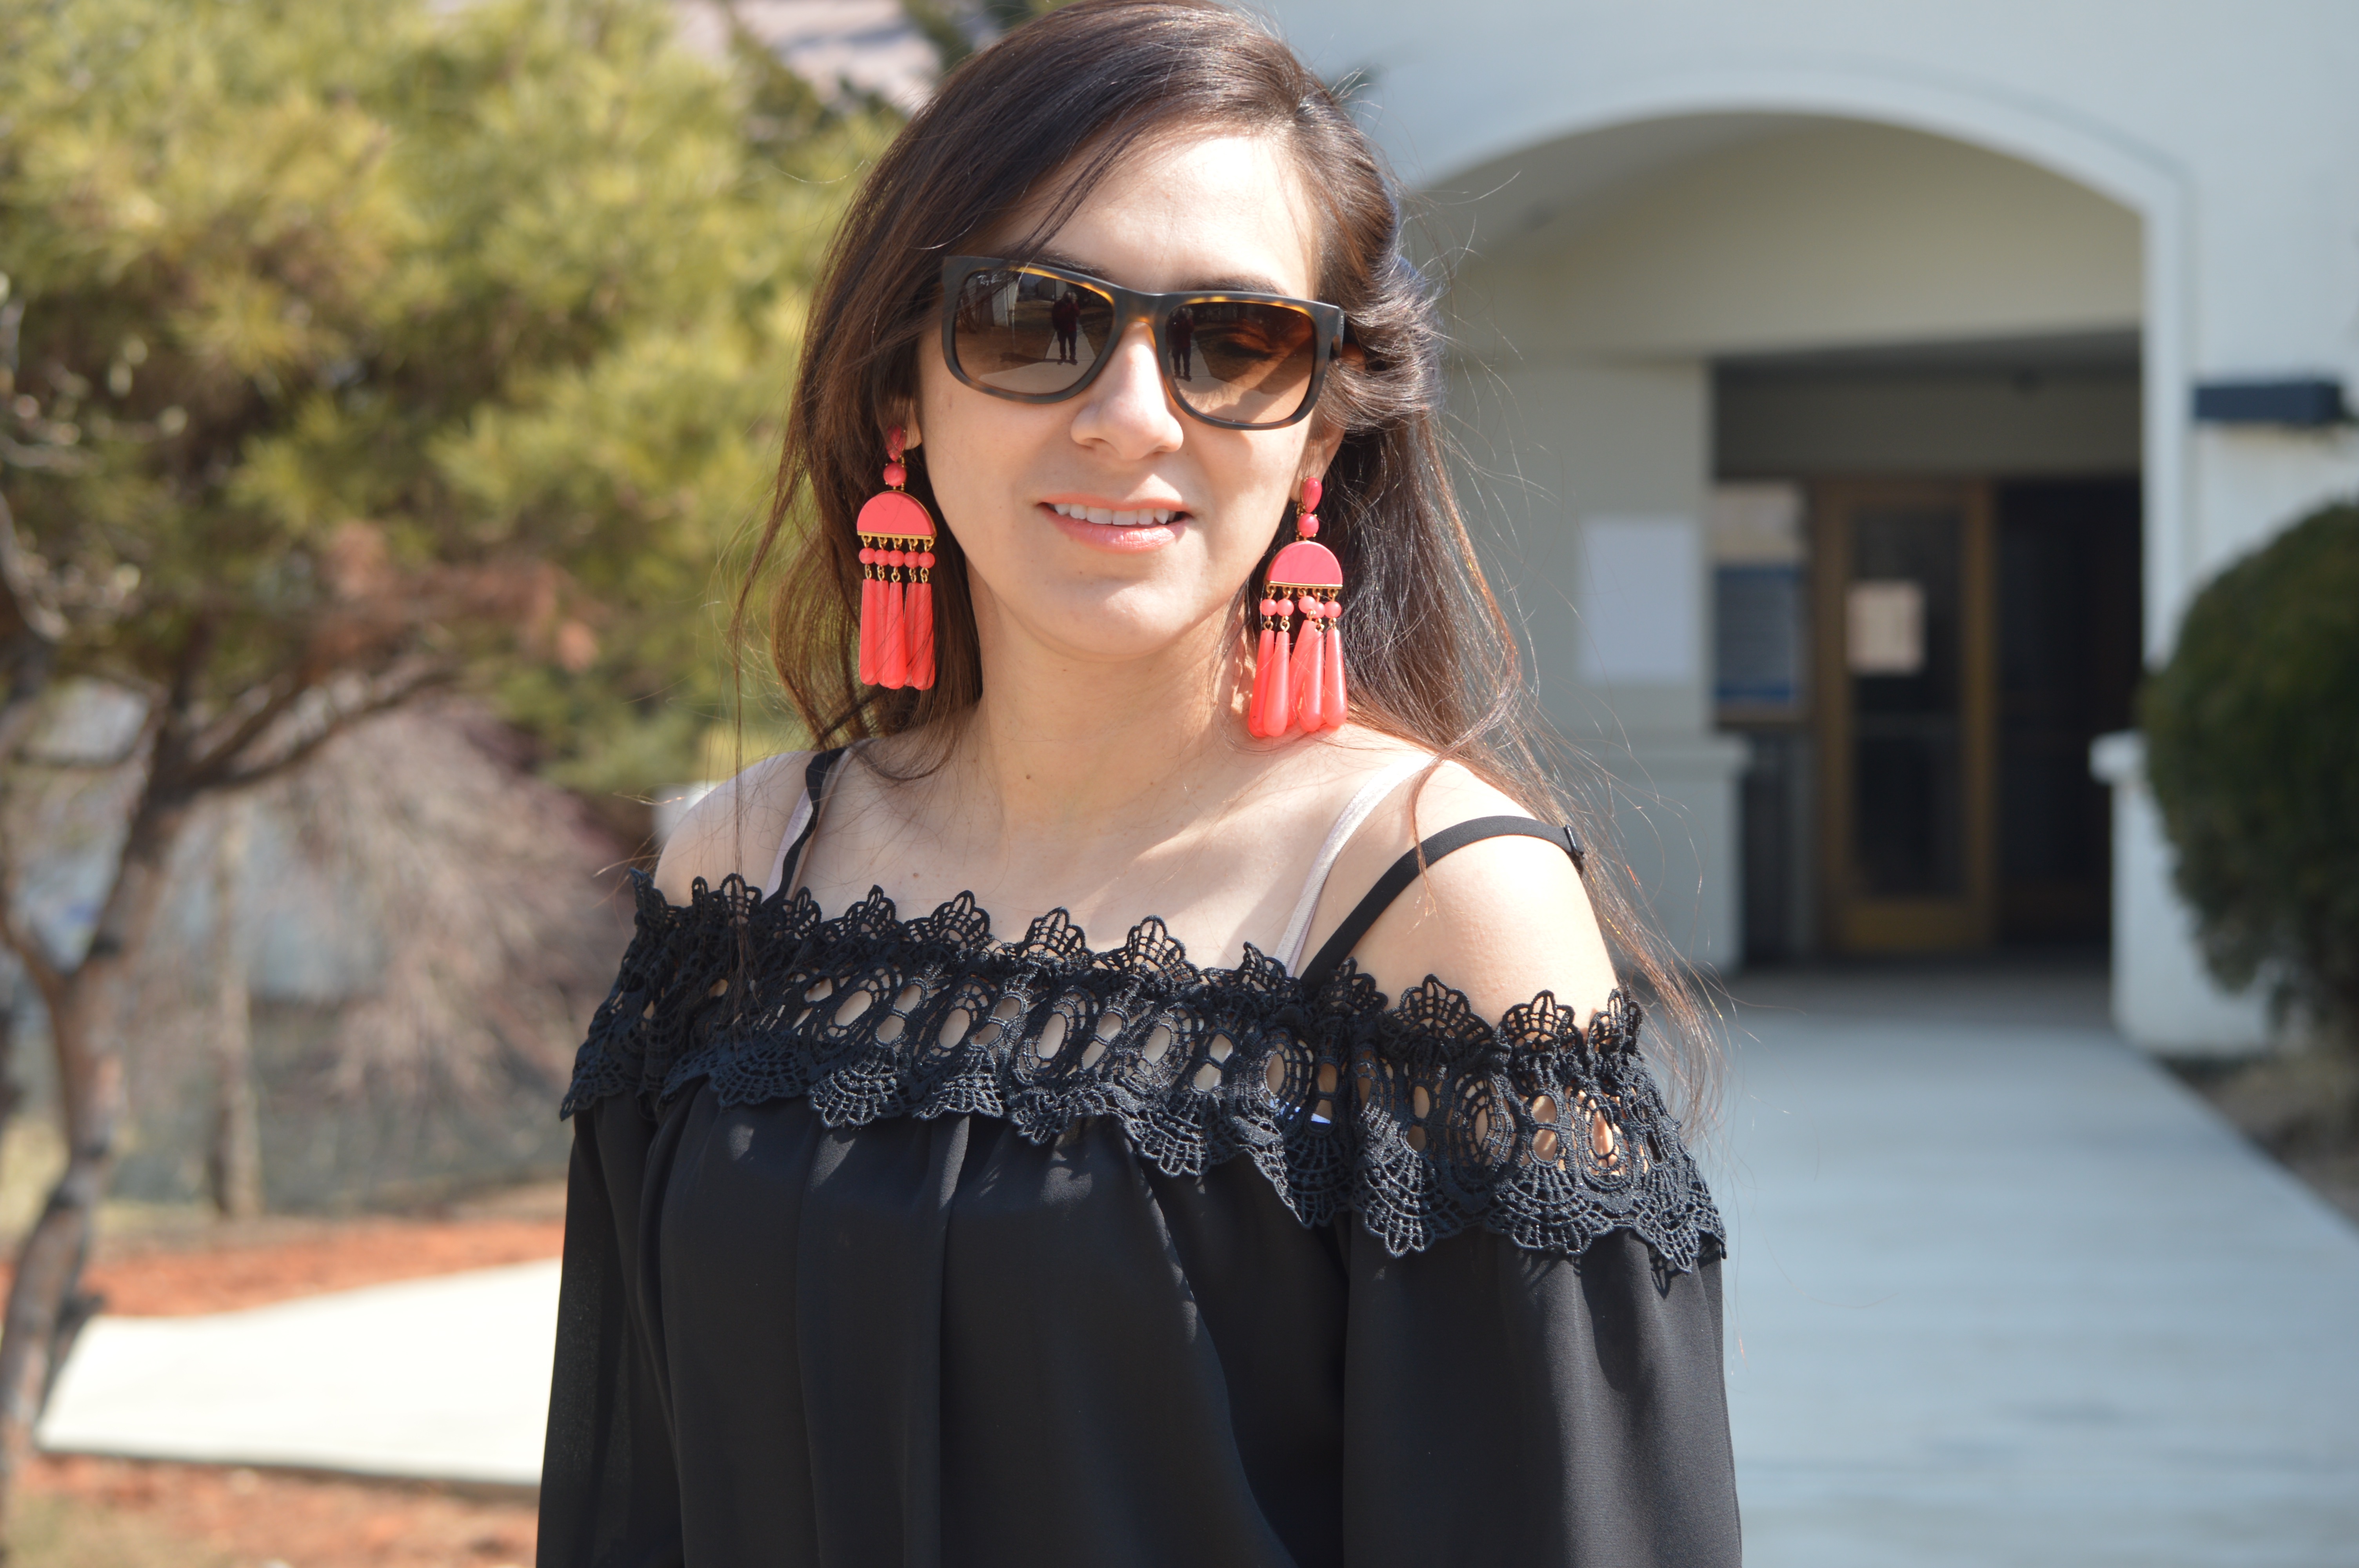 Off the Shoulder tops, liketoknowit, OTS Tops spring shopping, spring shopping, women clothes, bauble bar, statement earrings, spring fashion, spring fashion, shop my blog, shopping, what to wear, fashion blog, fashion blogger, fashion, style